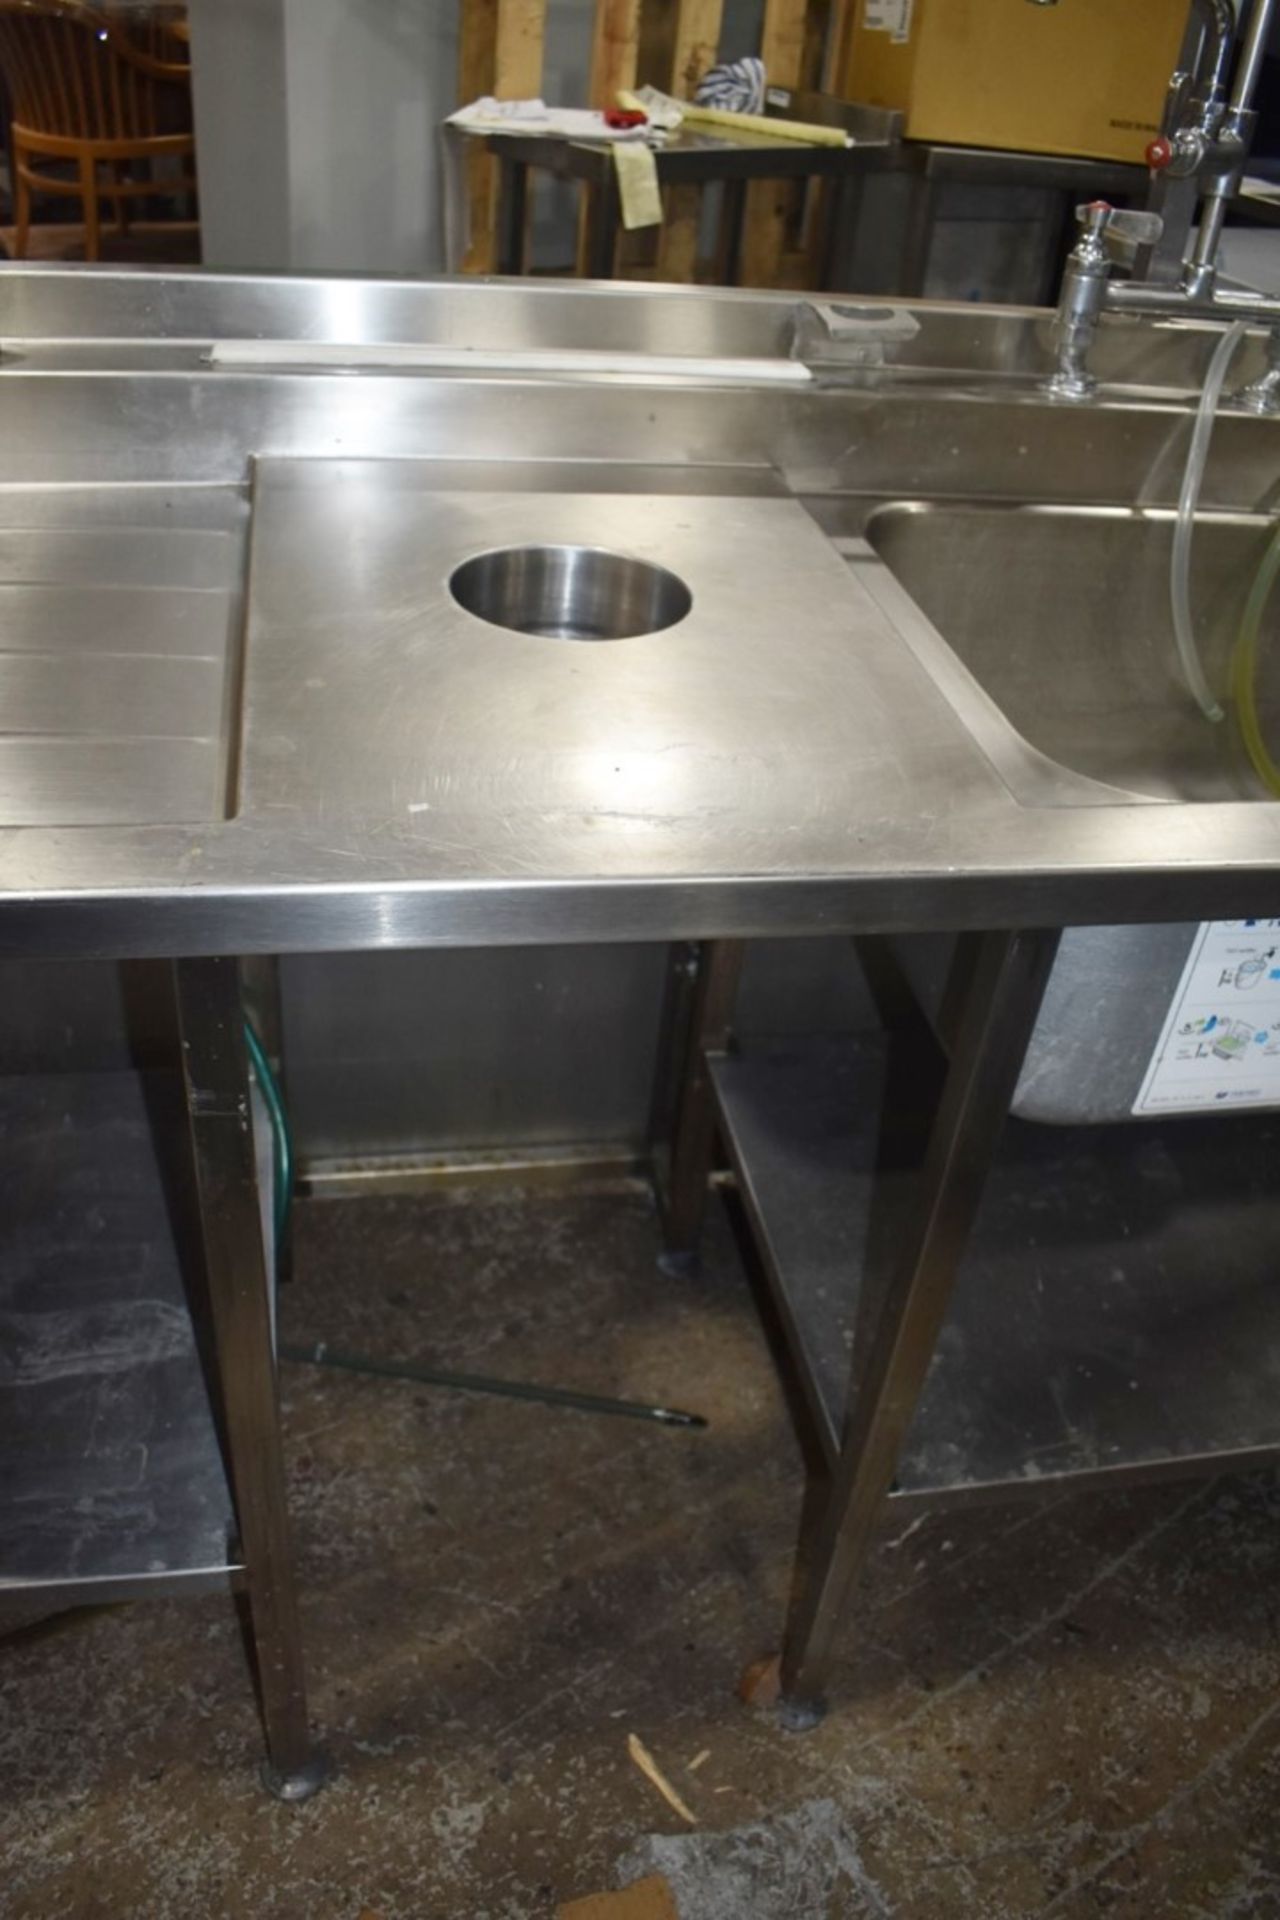 1 x Commercial Kitchen Wash Station With Two Large Sink Bowls, Mixer Taps, Spray Wash Guns, Drainer, - Image 19 of 22